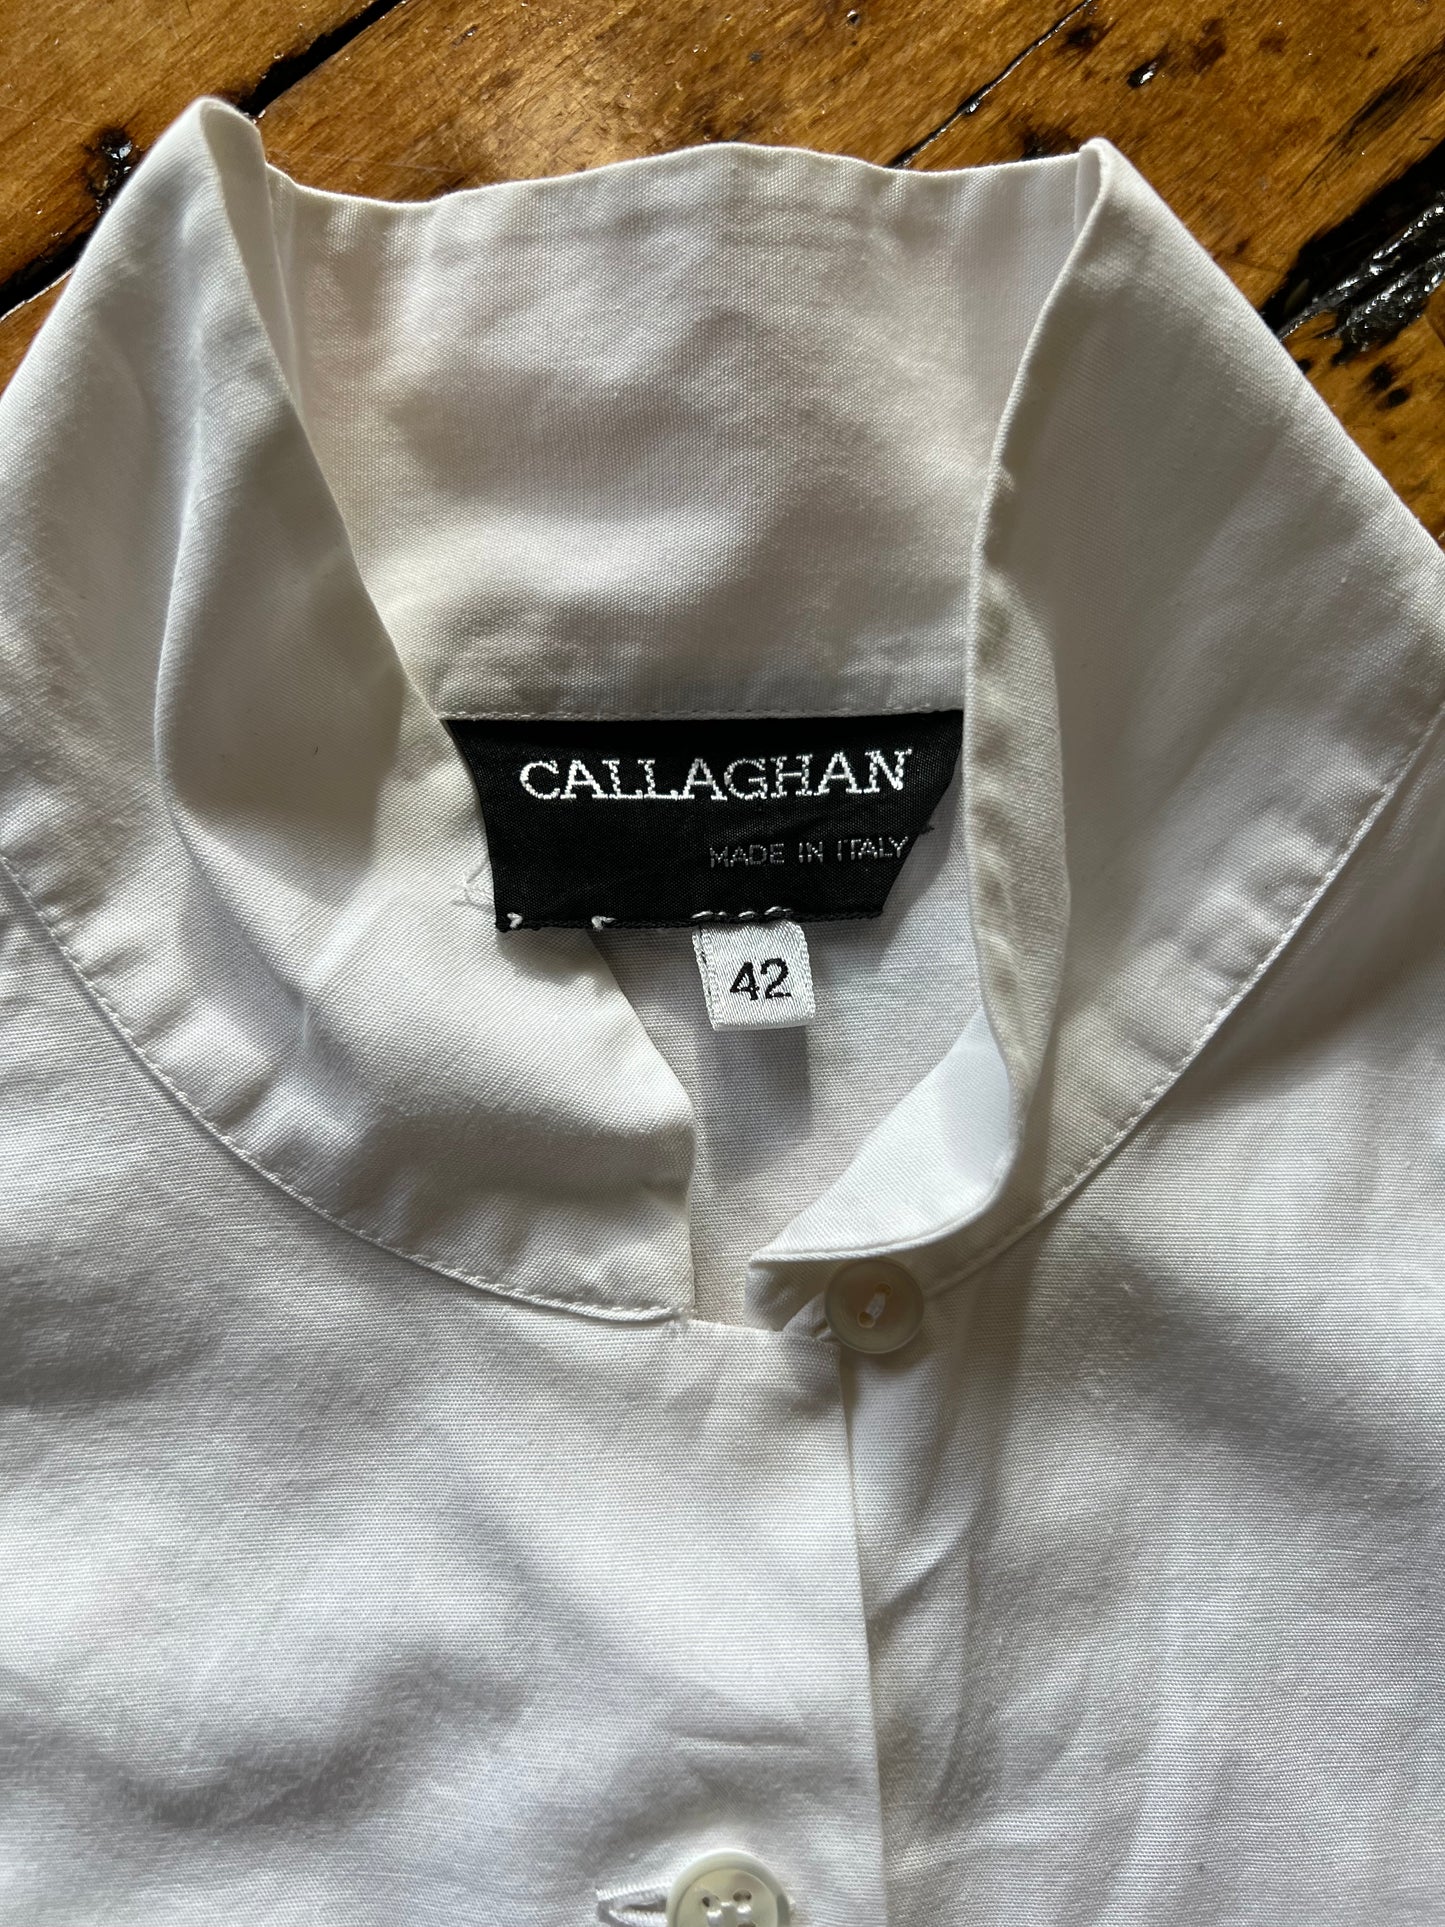 Cropped White Shirt | Romeo Gigli for Callaghan